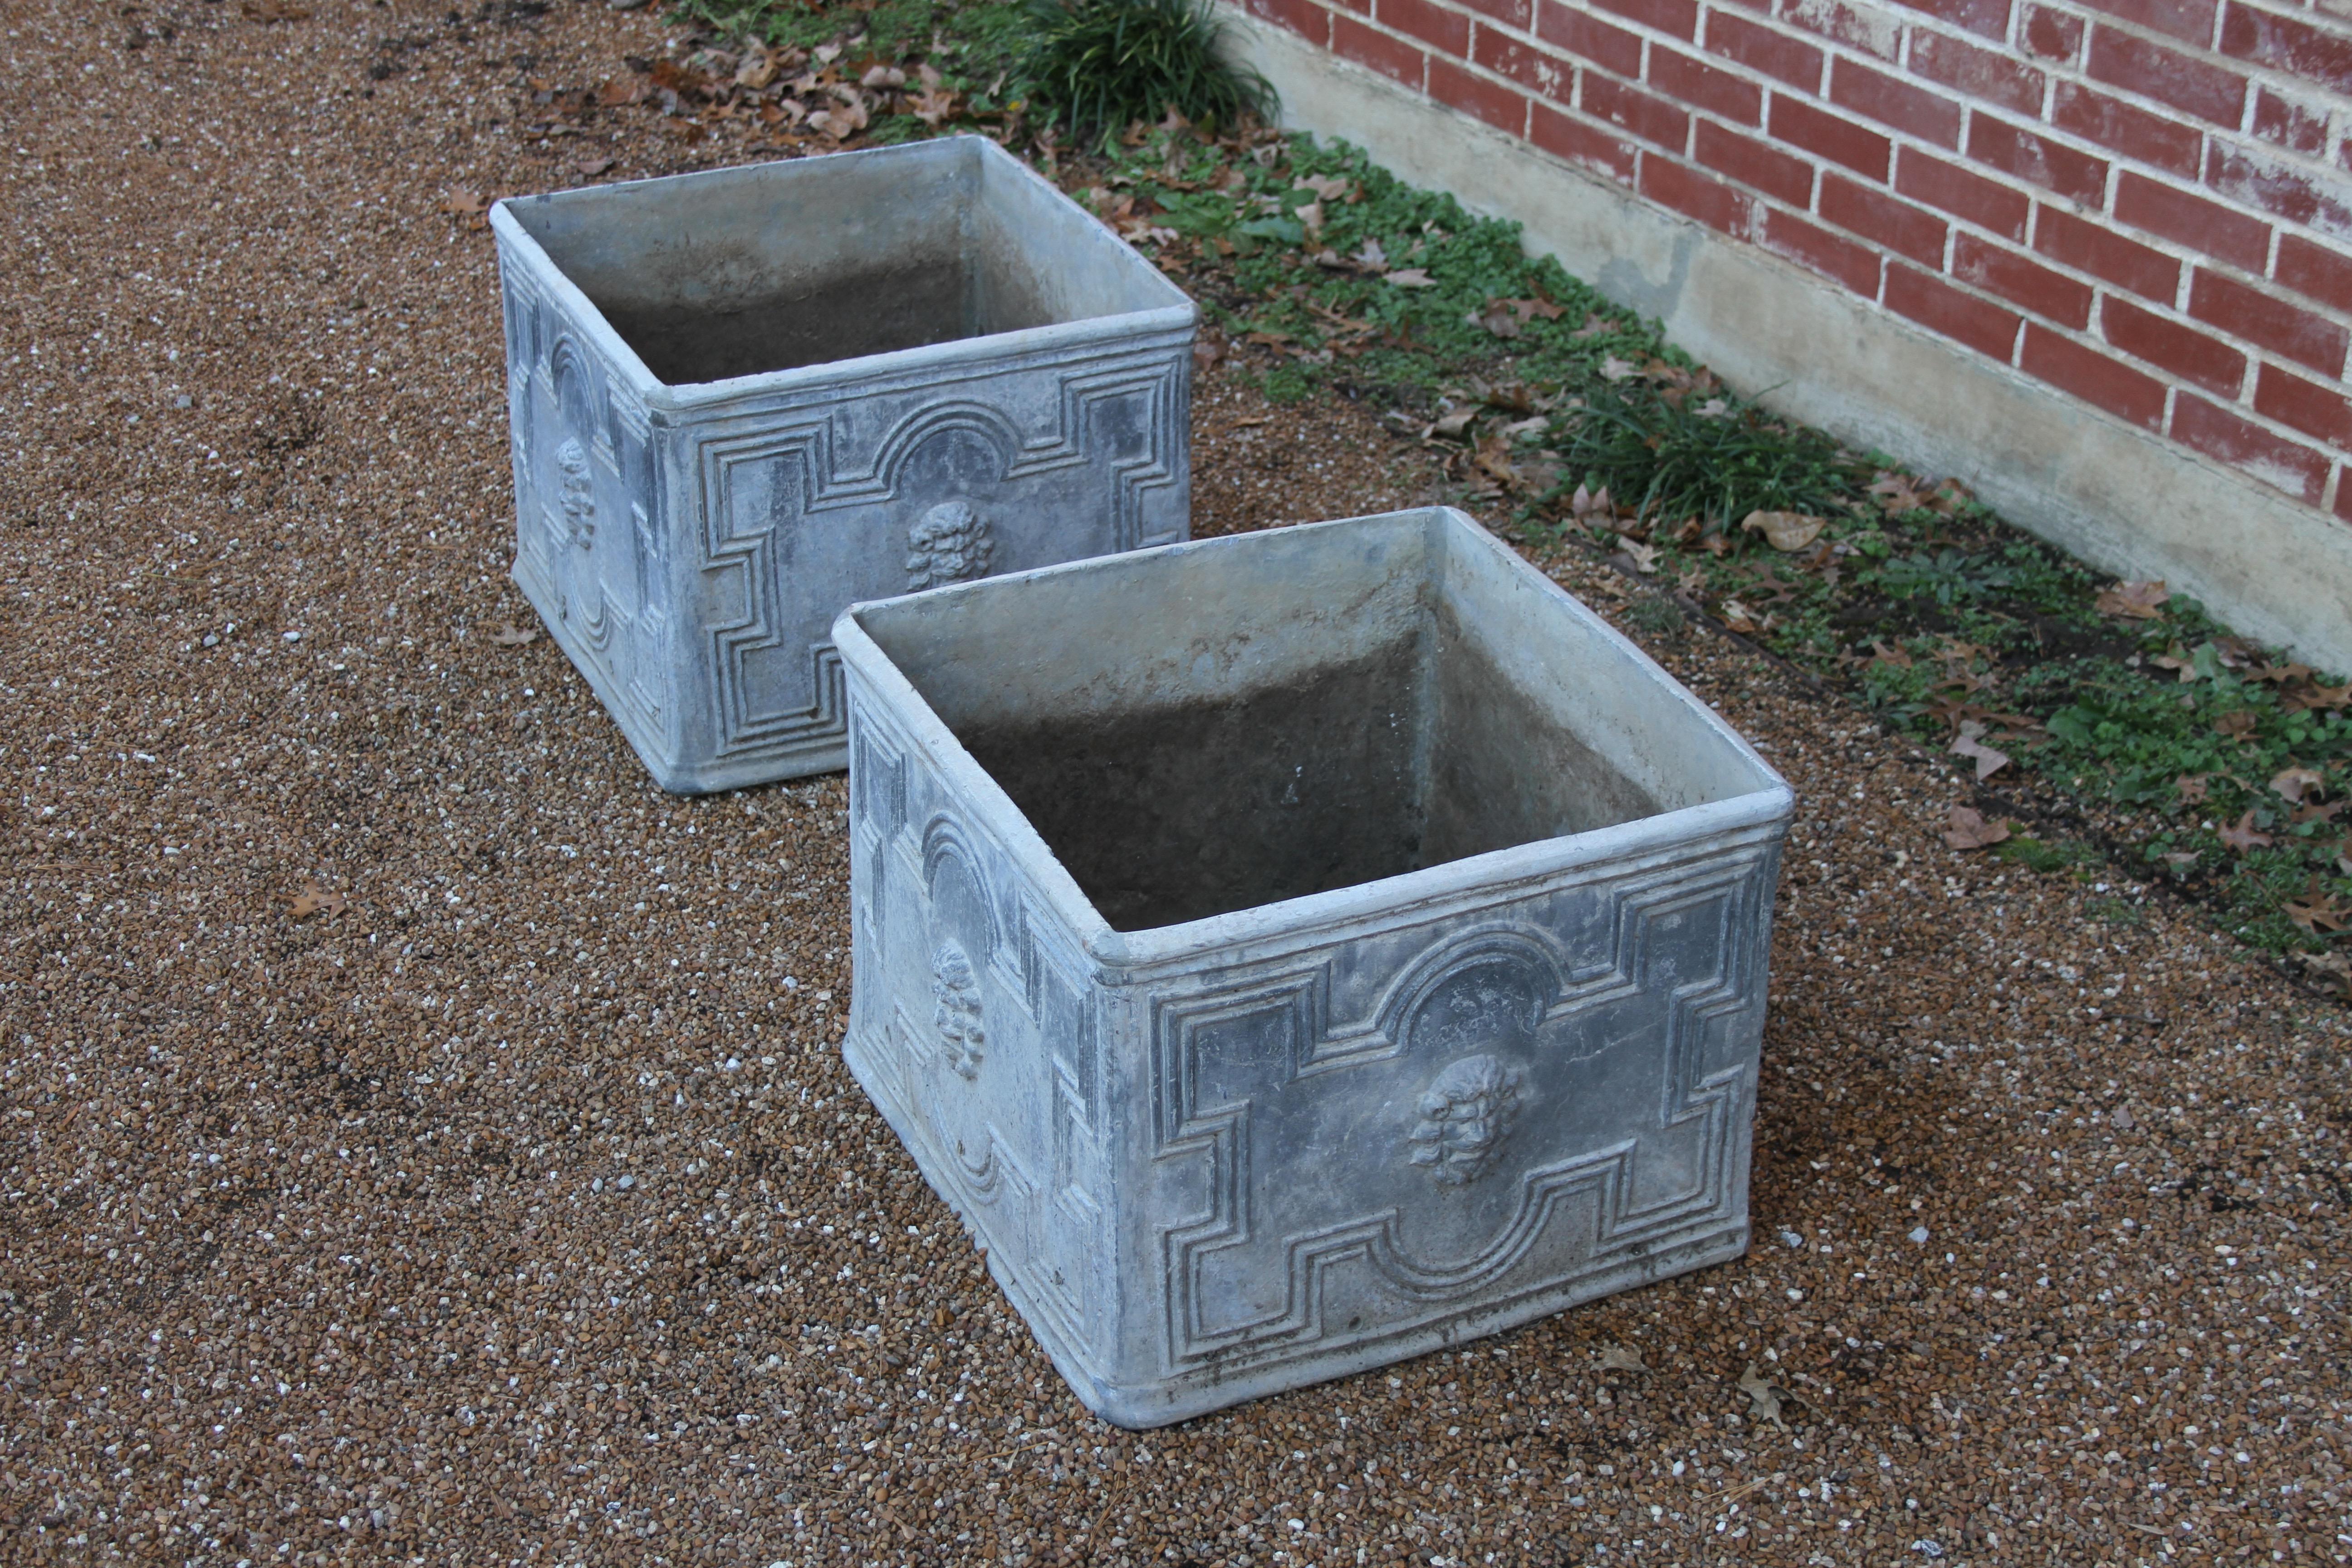 Pair of Square Antique English Lead Jardinieres with Lion Heads Planter Boxes  7